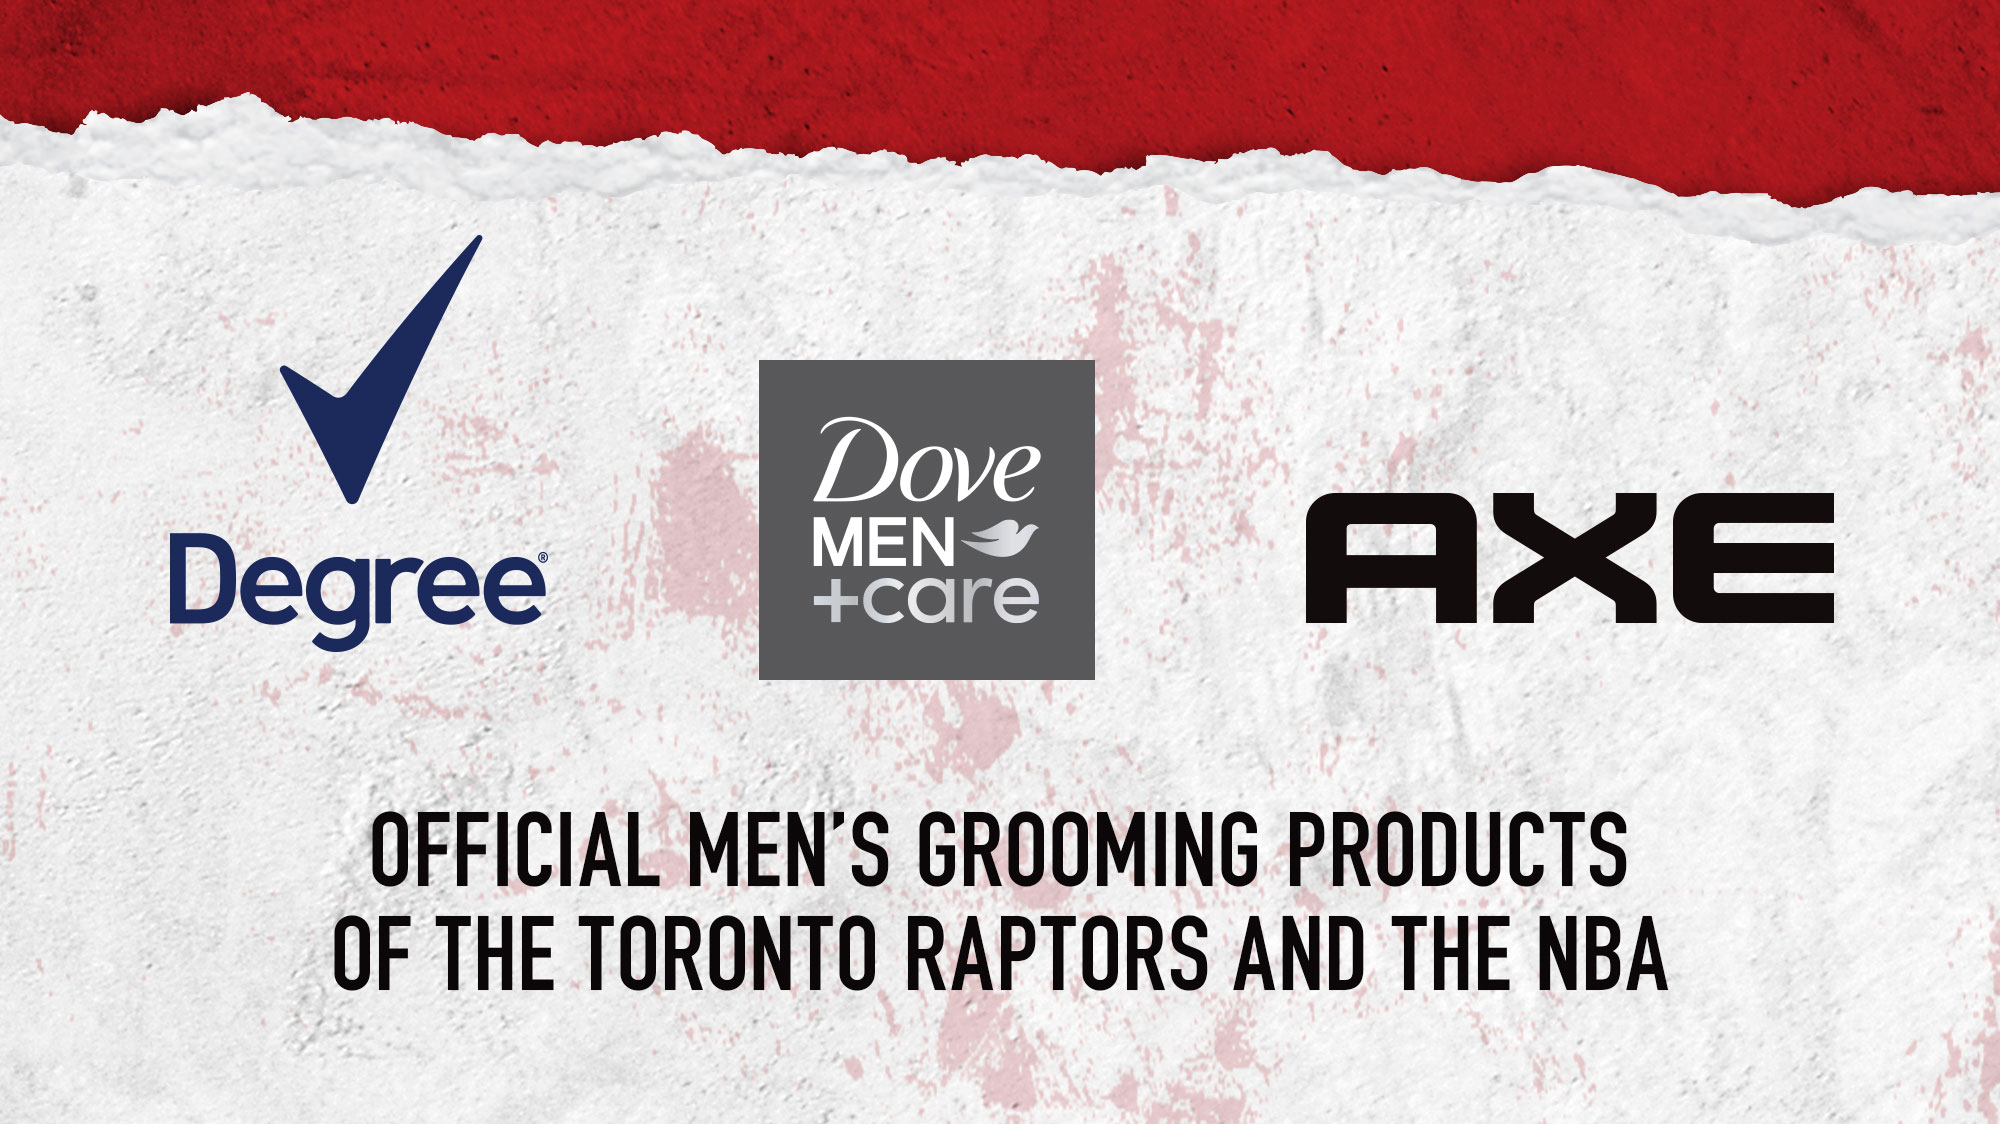 Degree, Dove Men +care and Axe - Official Men's Grooming Products of the Toronto Raptors and the NBA